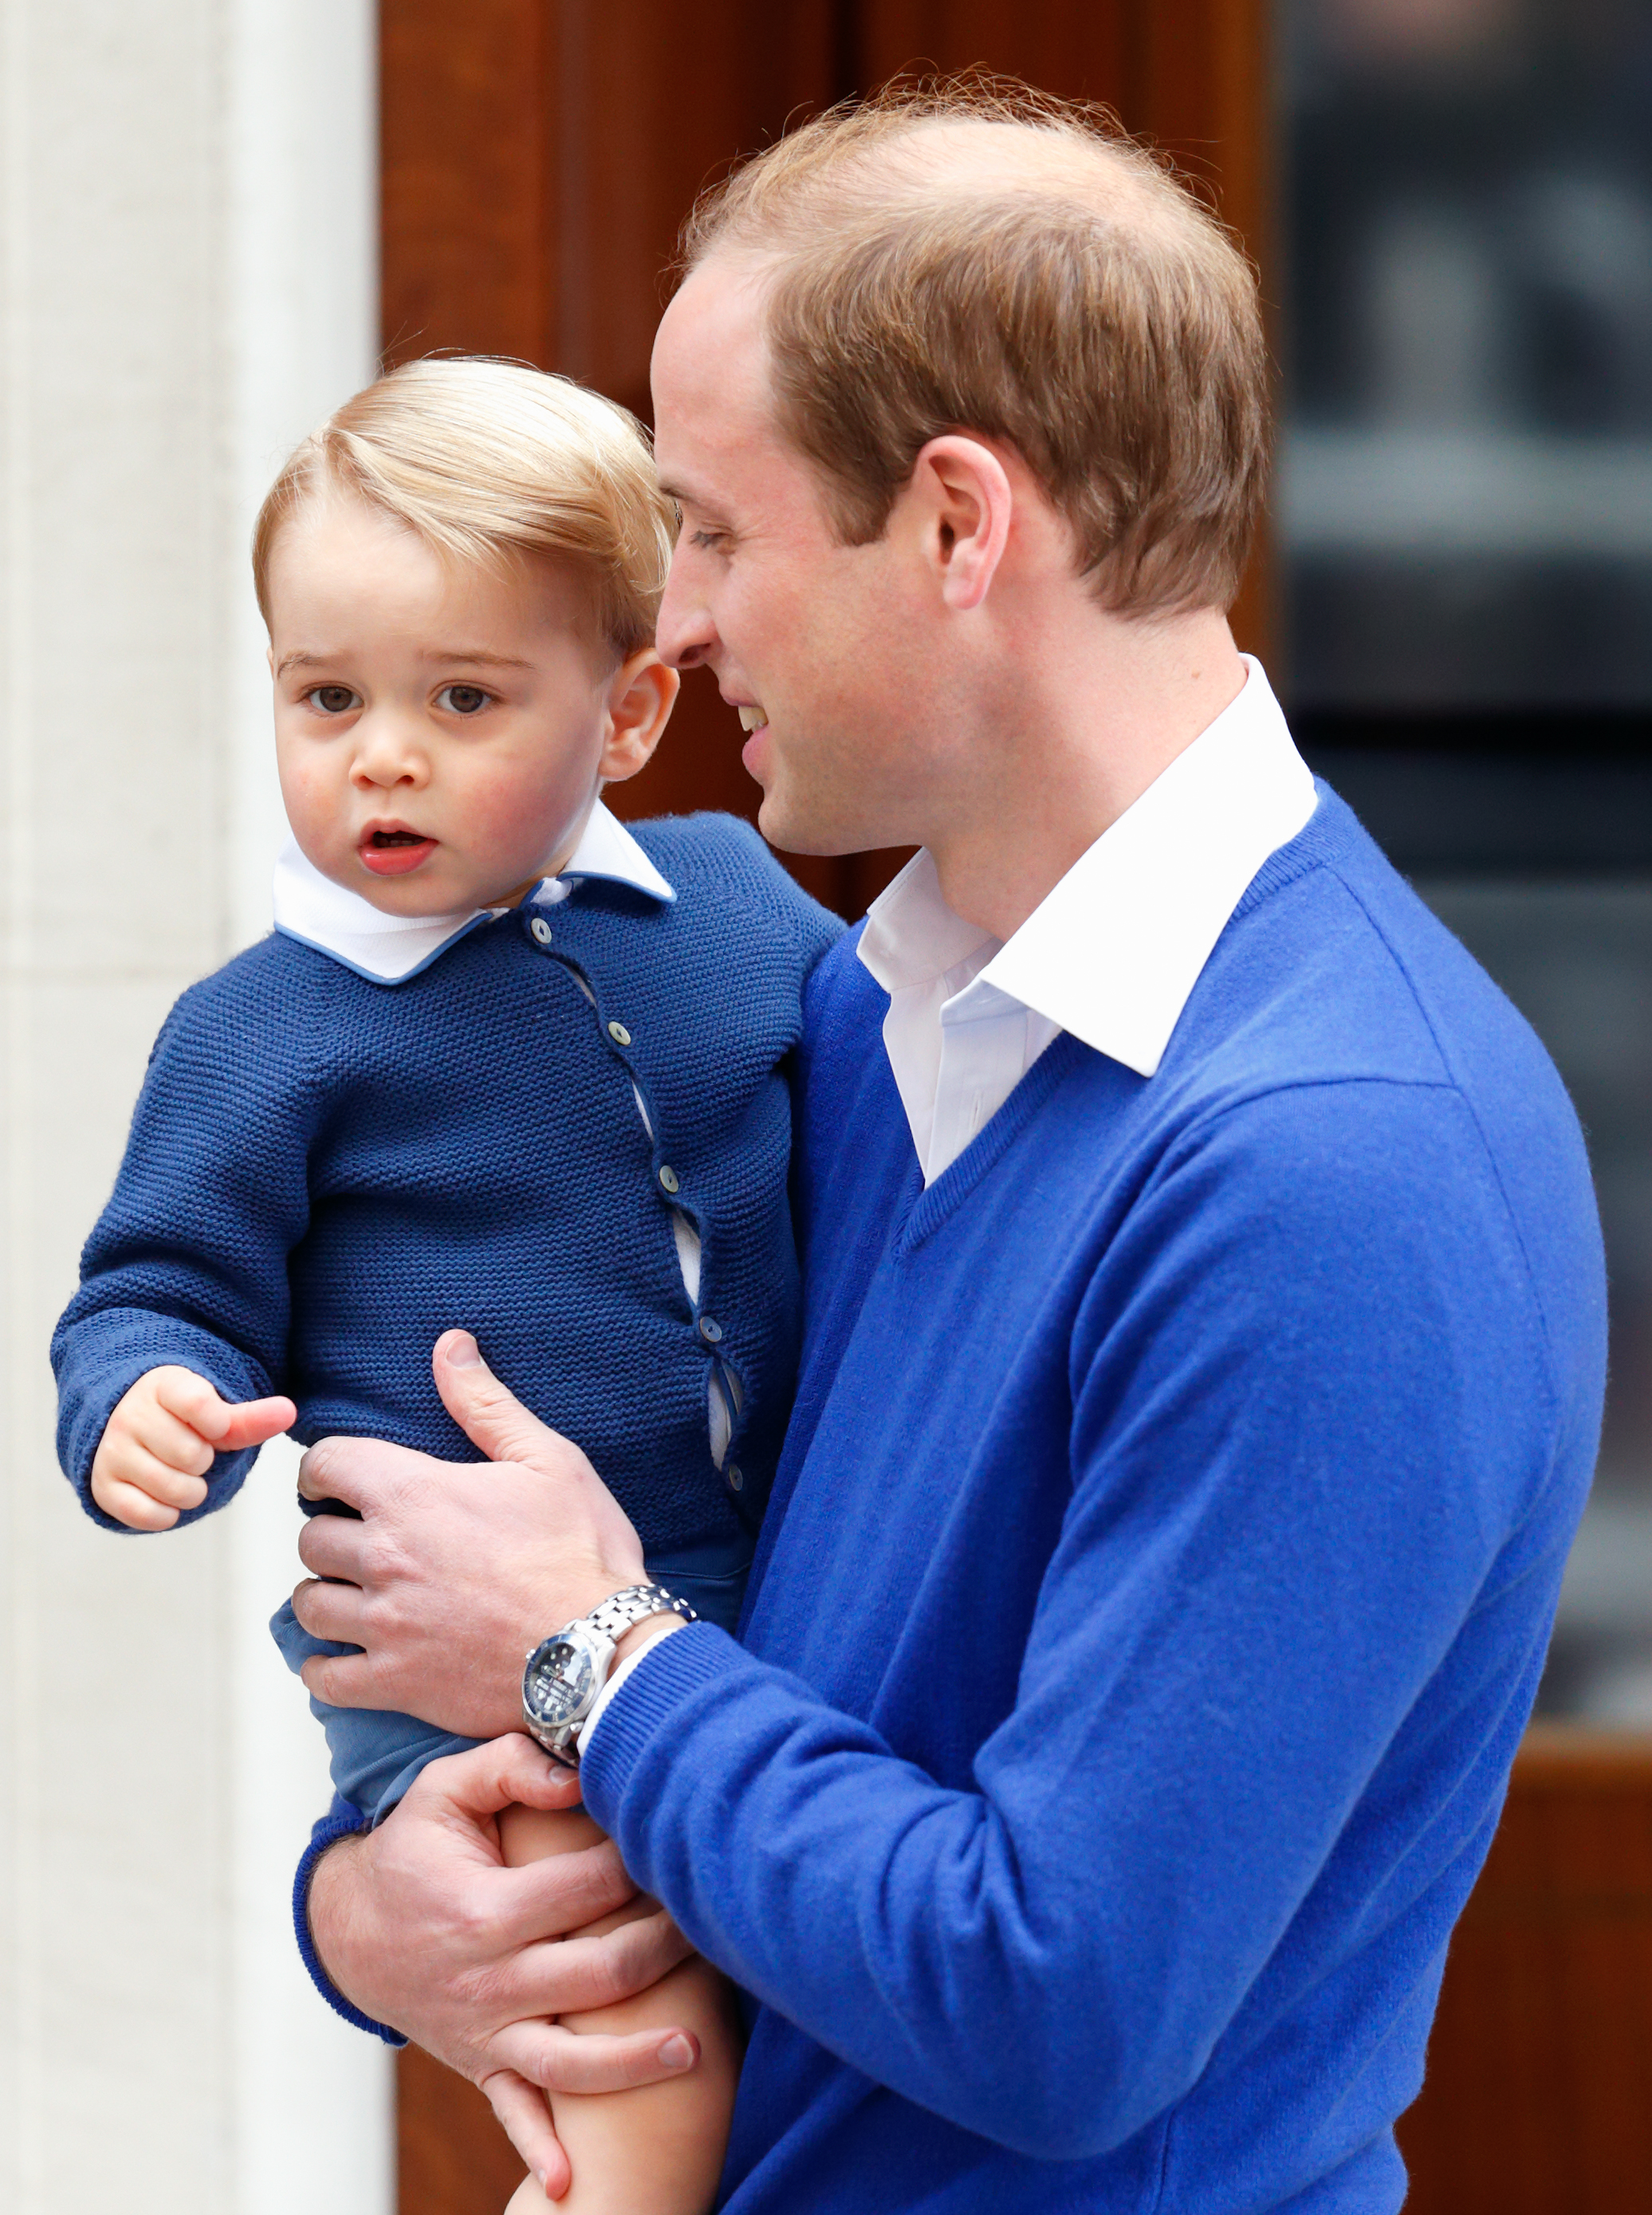 Prince George and Prince William arrive at the Lindo Wing after Princess Catherine gave birth to Princess Charlotte at St Mary's Hospital in London, England on May 2, 2015 | Source: Getty Images